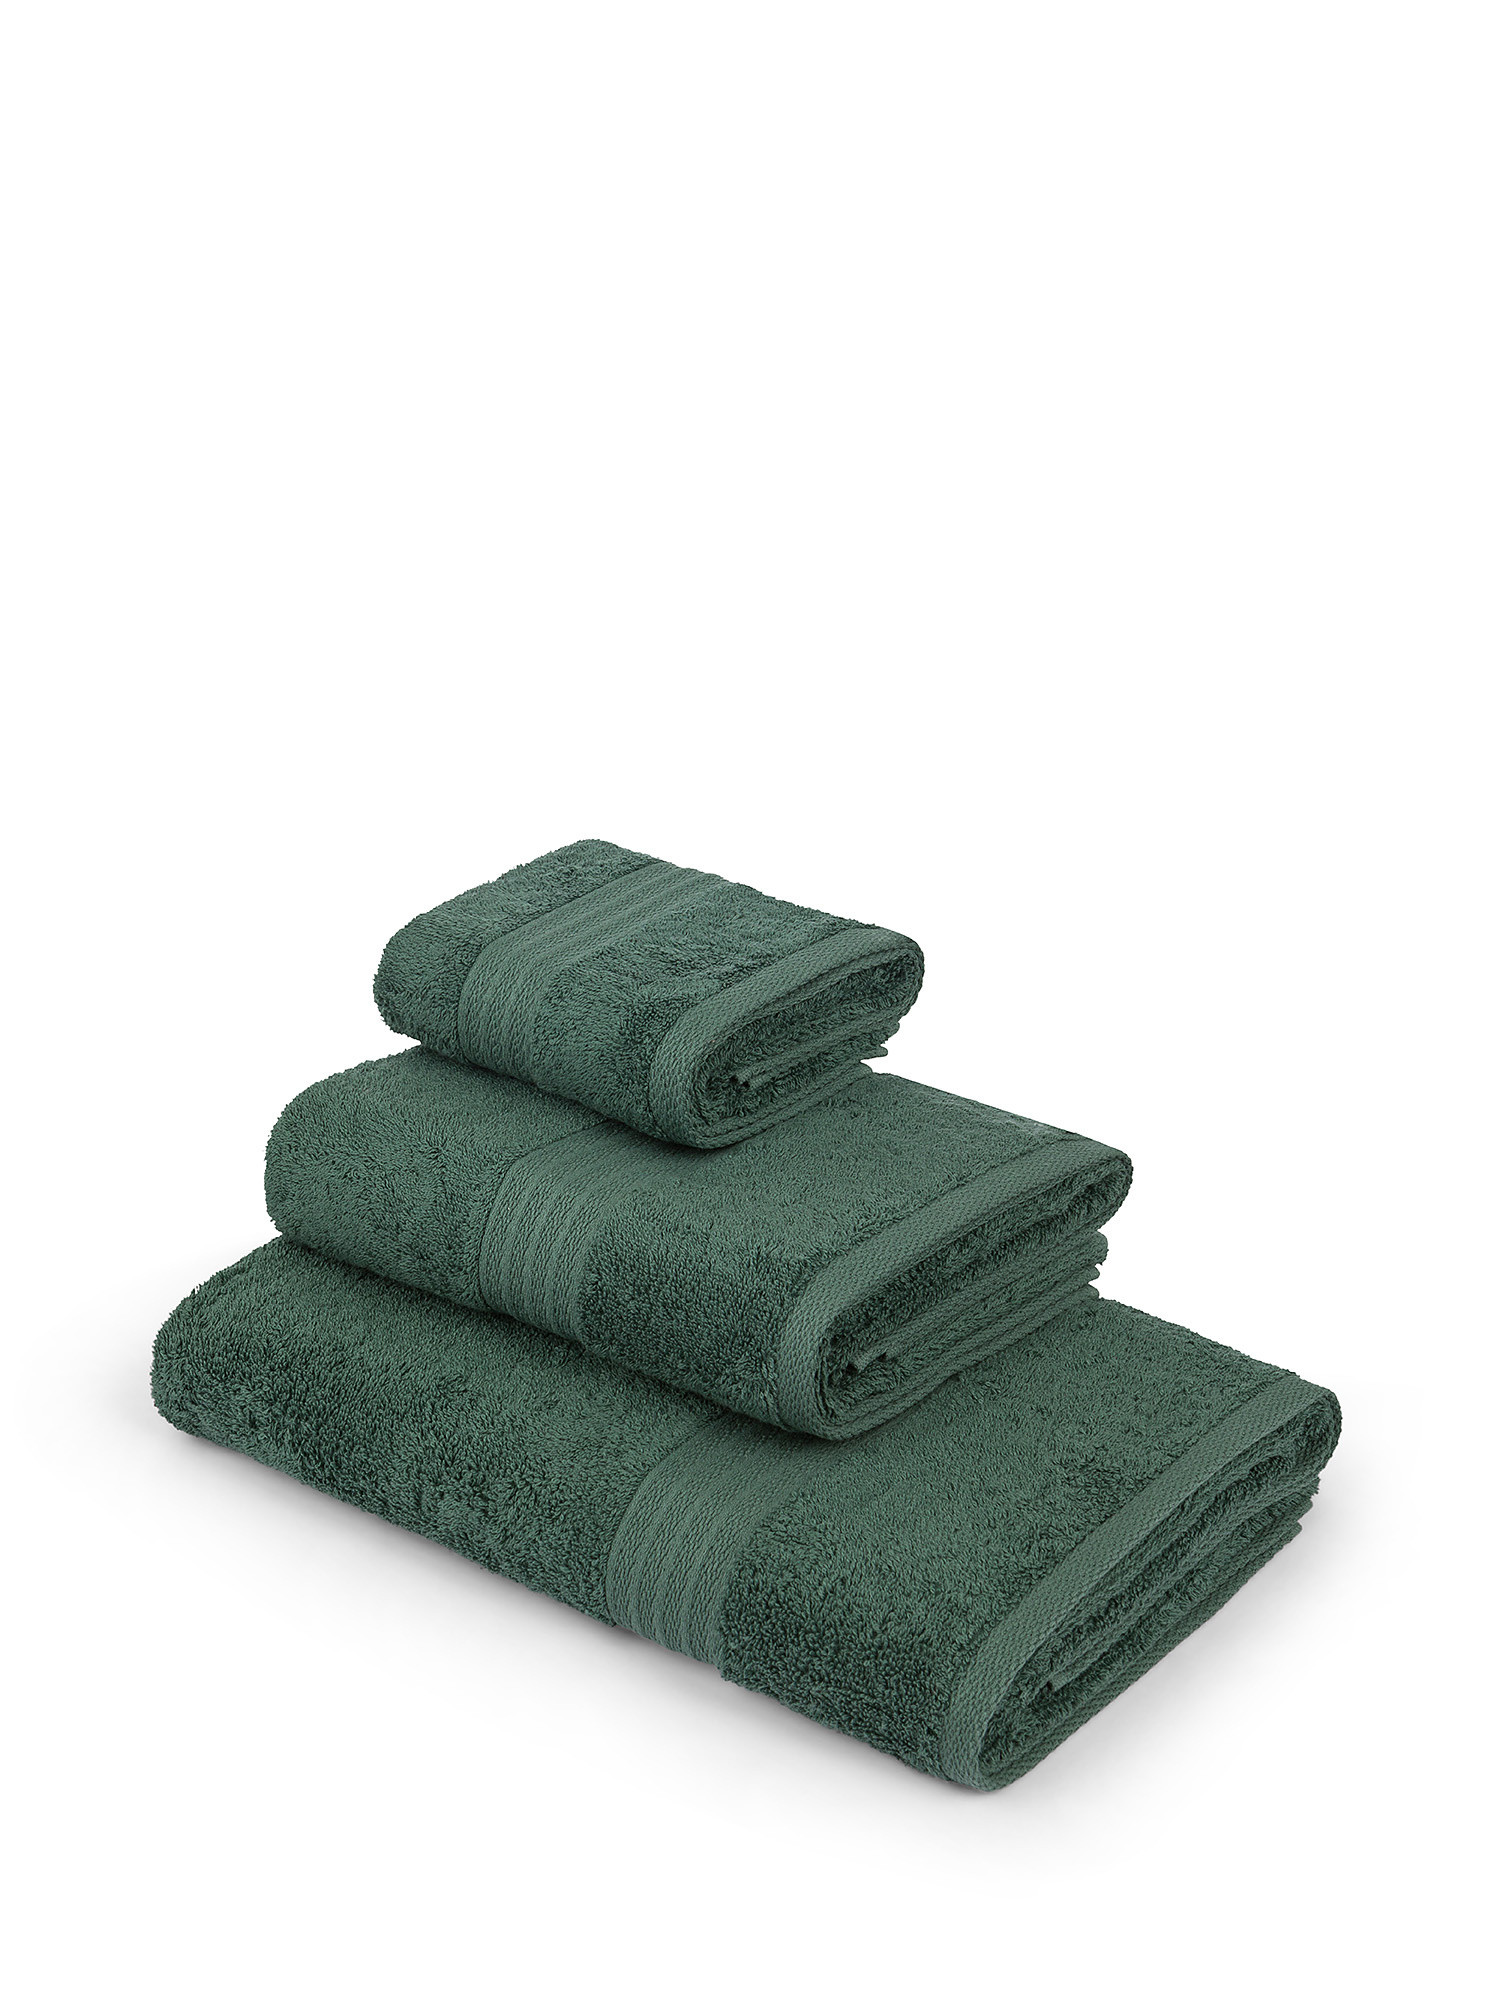 Zefiro solid color 100% cotton towel, Light Green, large image number 0